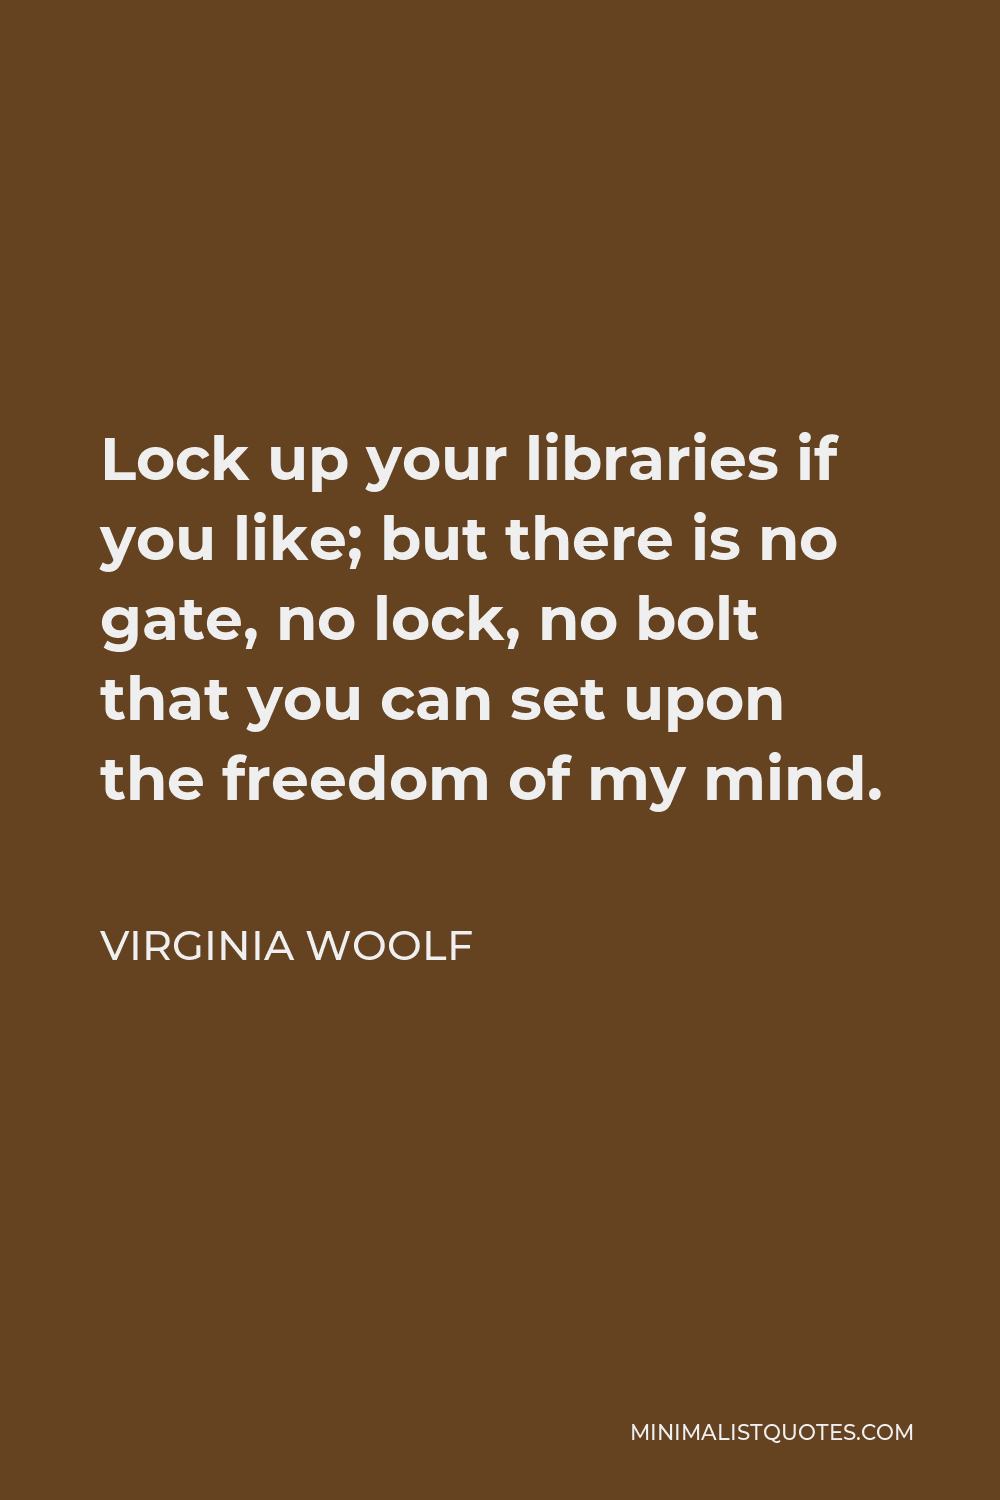 Virginia Woolf Quote - Lock up your libraries if you like; but there is no gate, no lock, no bolt that you can set upon the freedom of my mind.